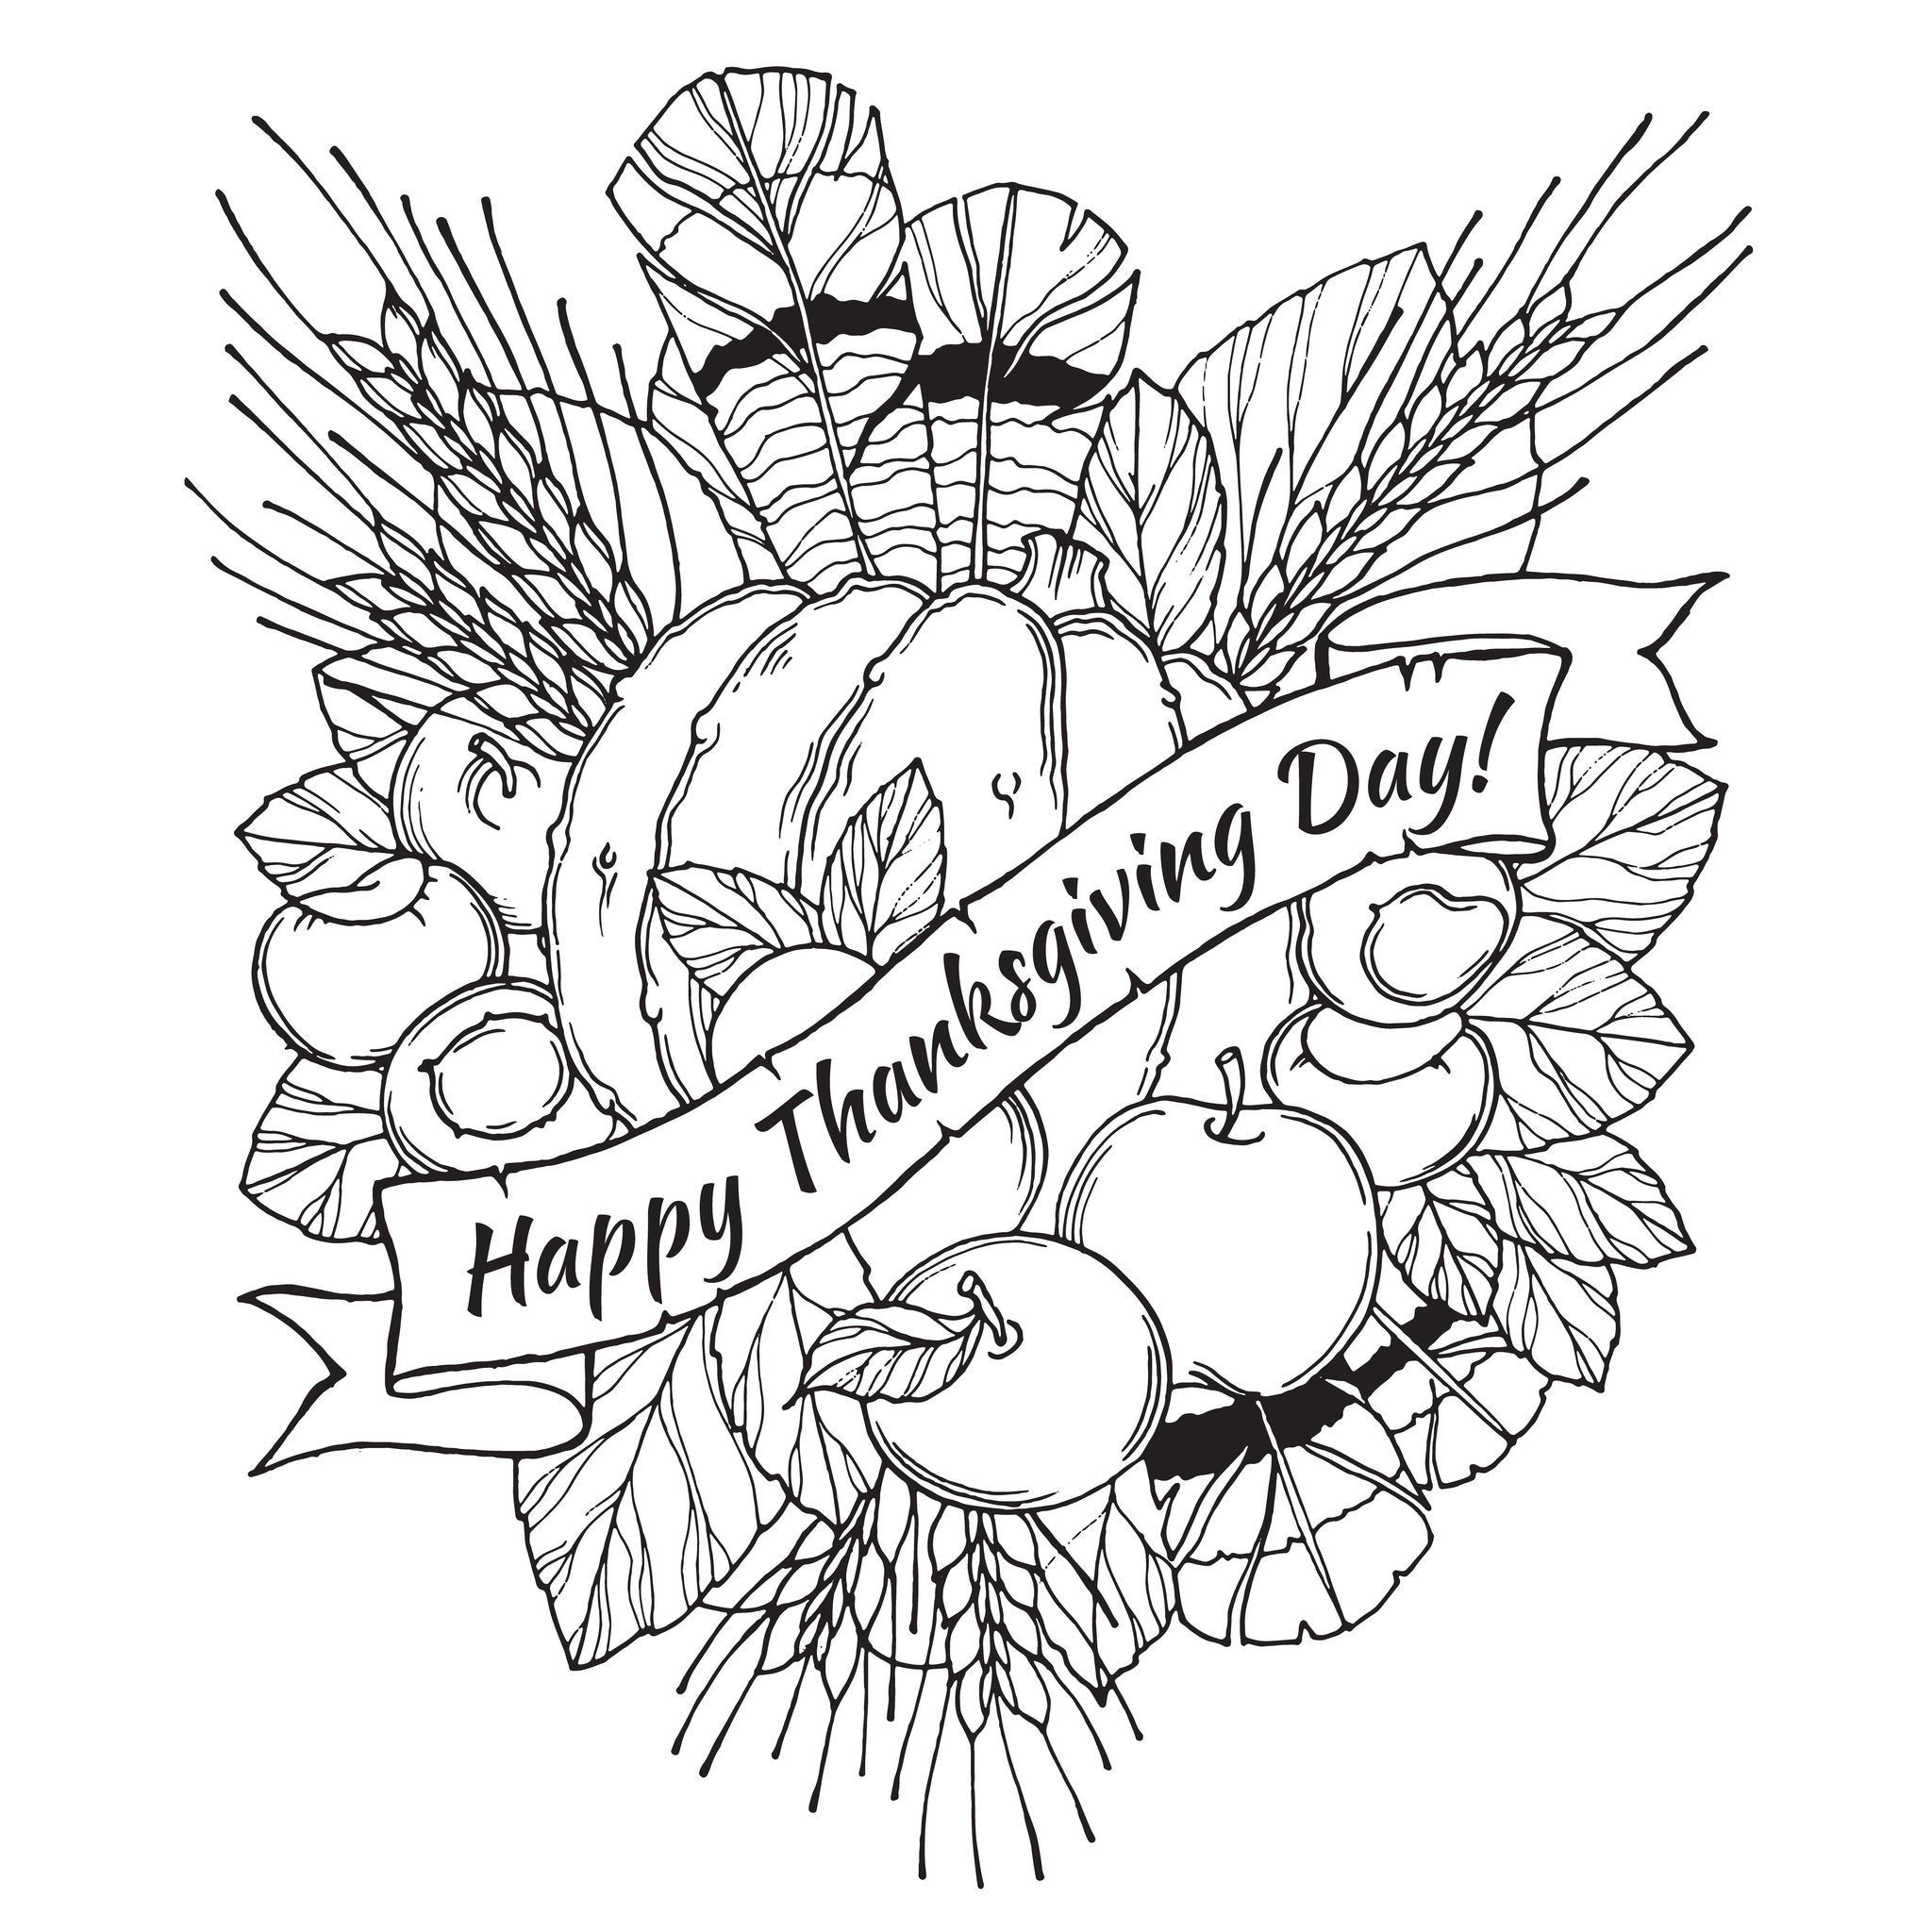 Turkey Coloring Pages For Adults
 Thanksgiving Coloring Pages For Adults Coloring Home